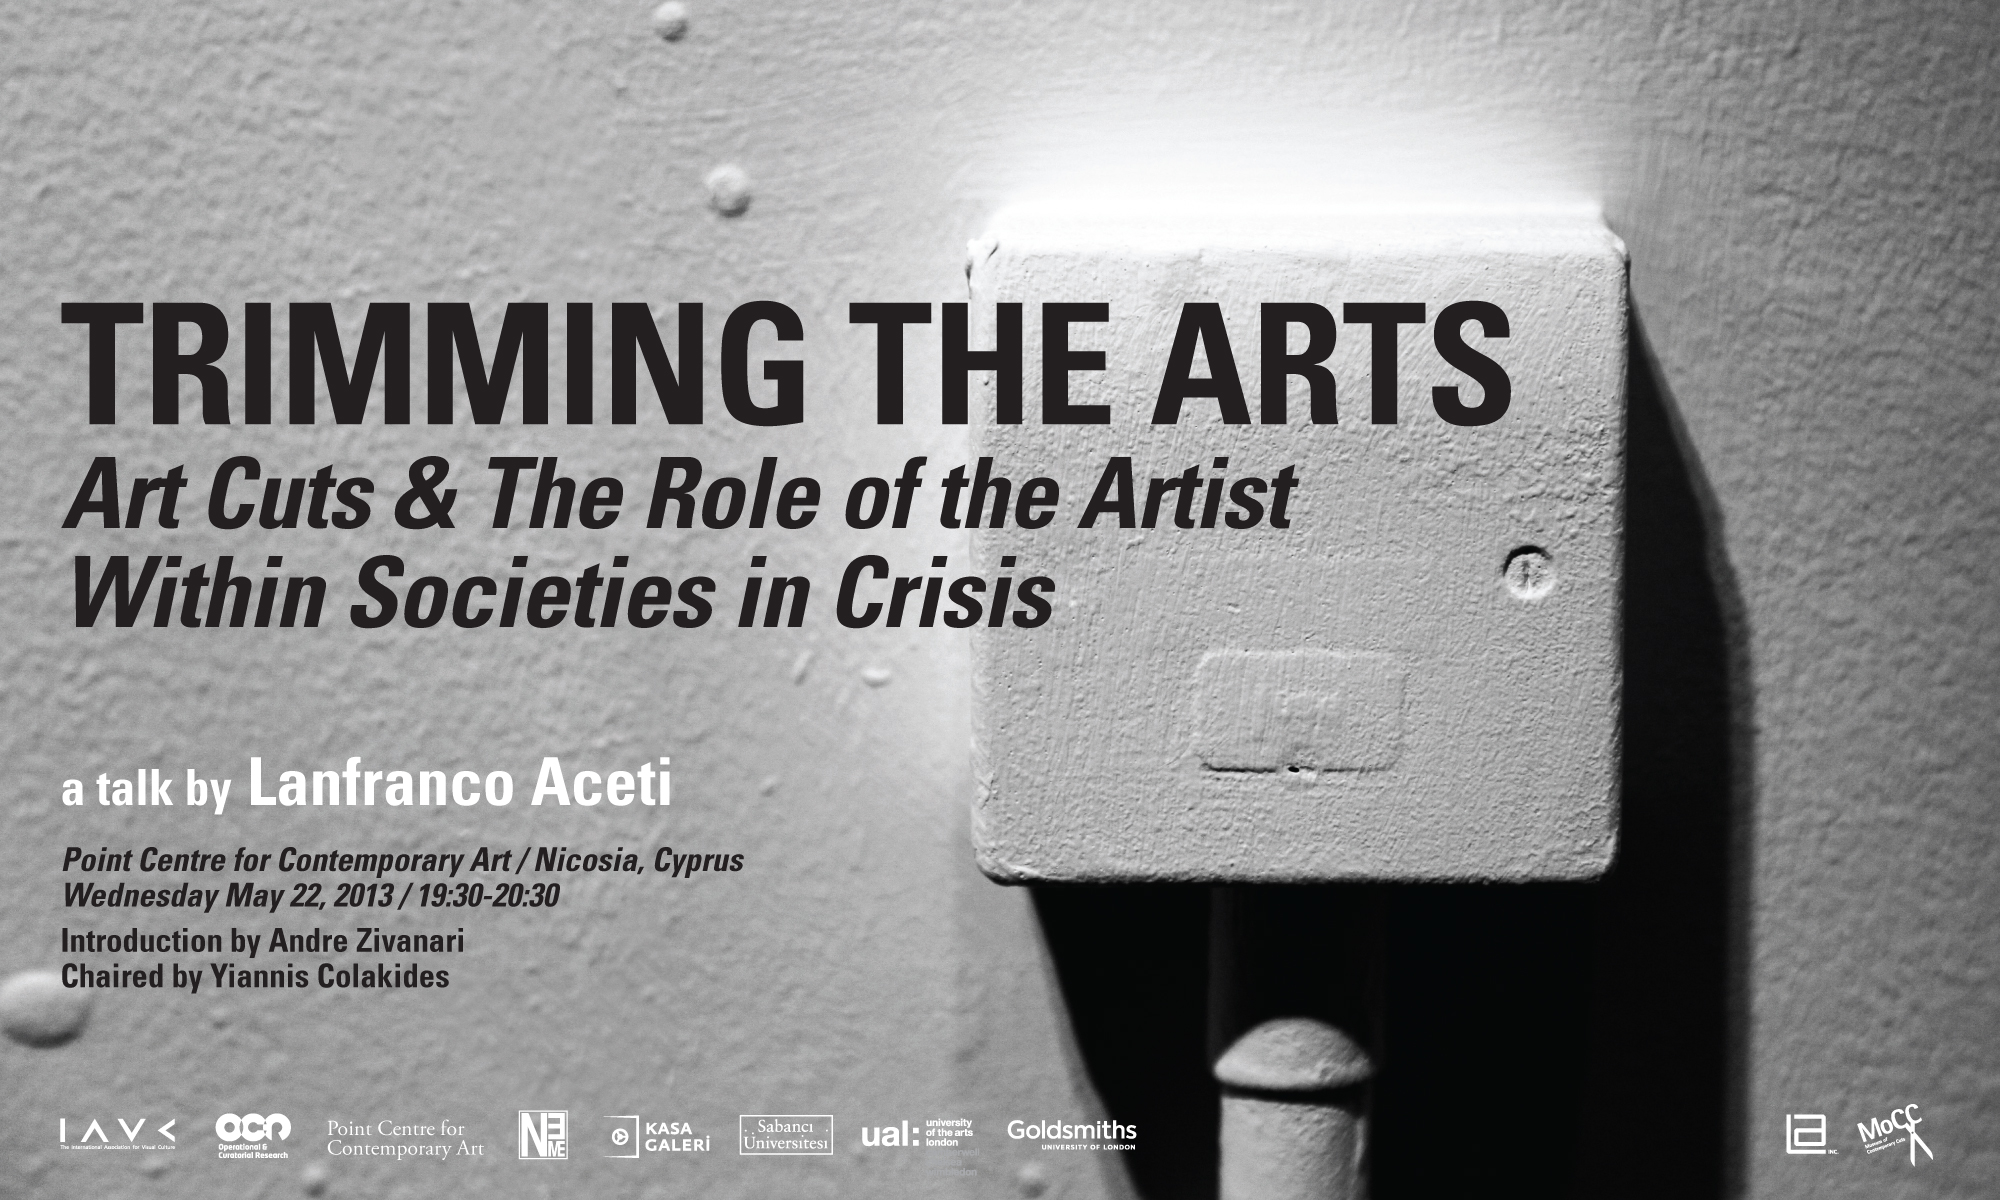 Trimming the Arts: Art Cuts and the Role of the Artist within Societies in Crisis